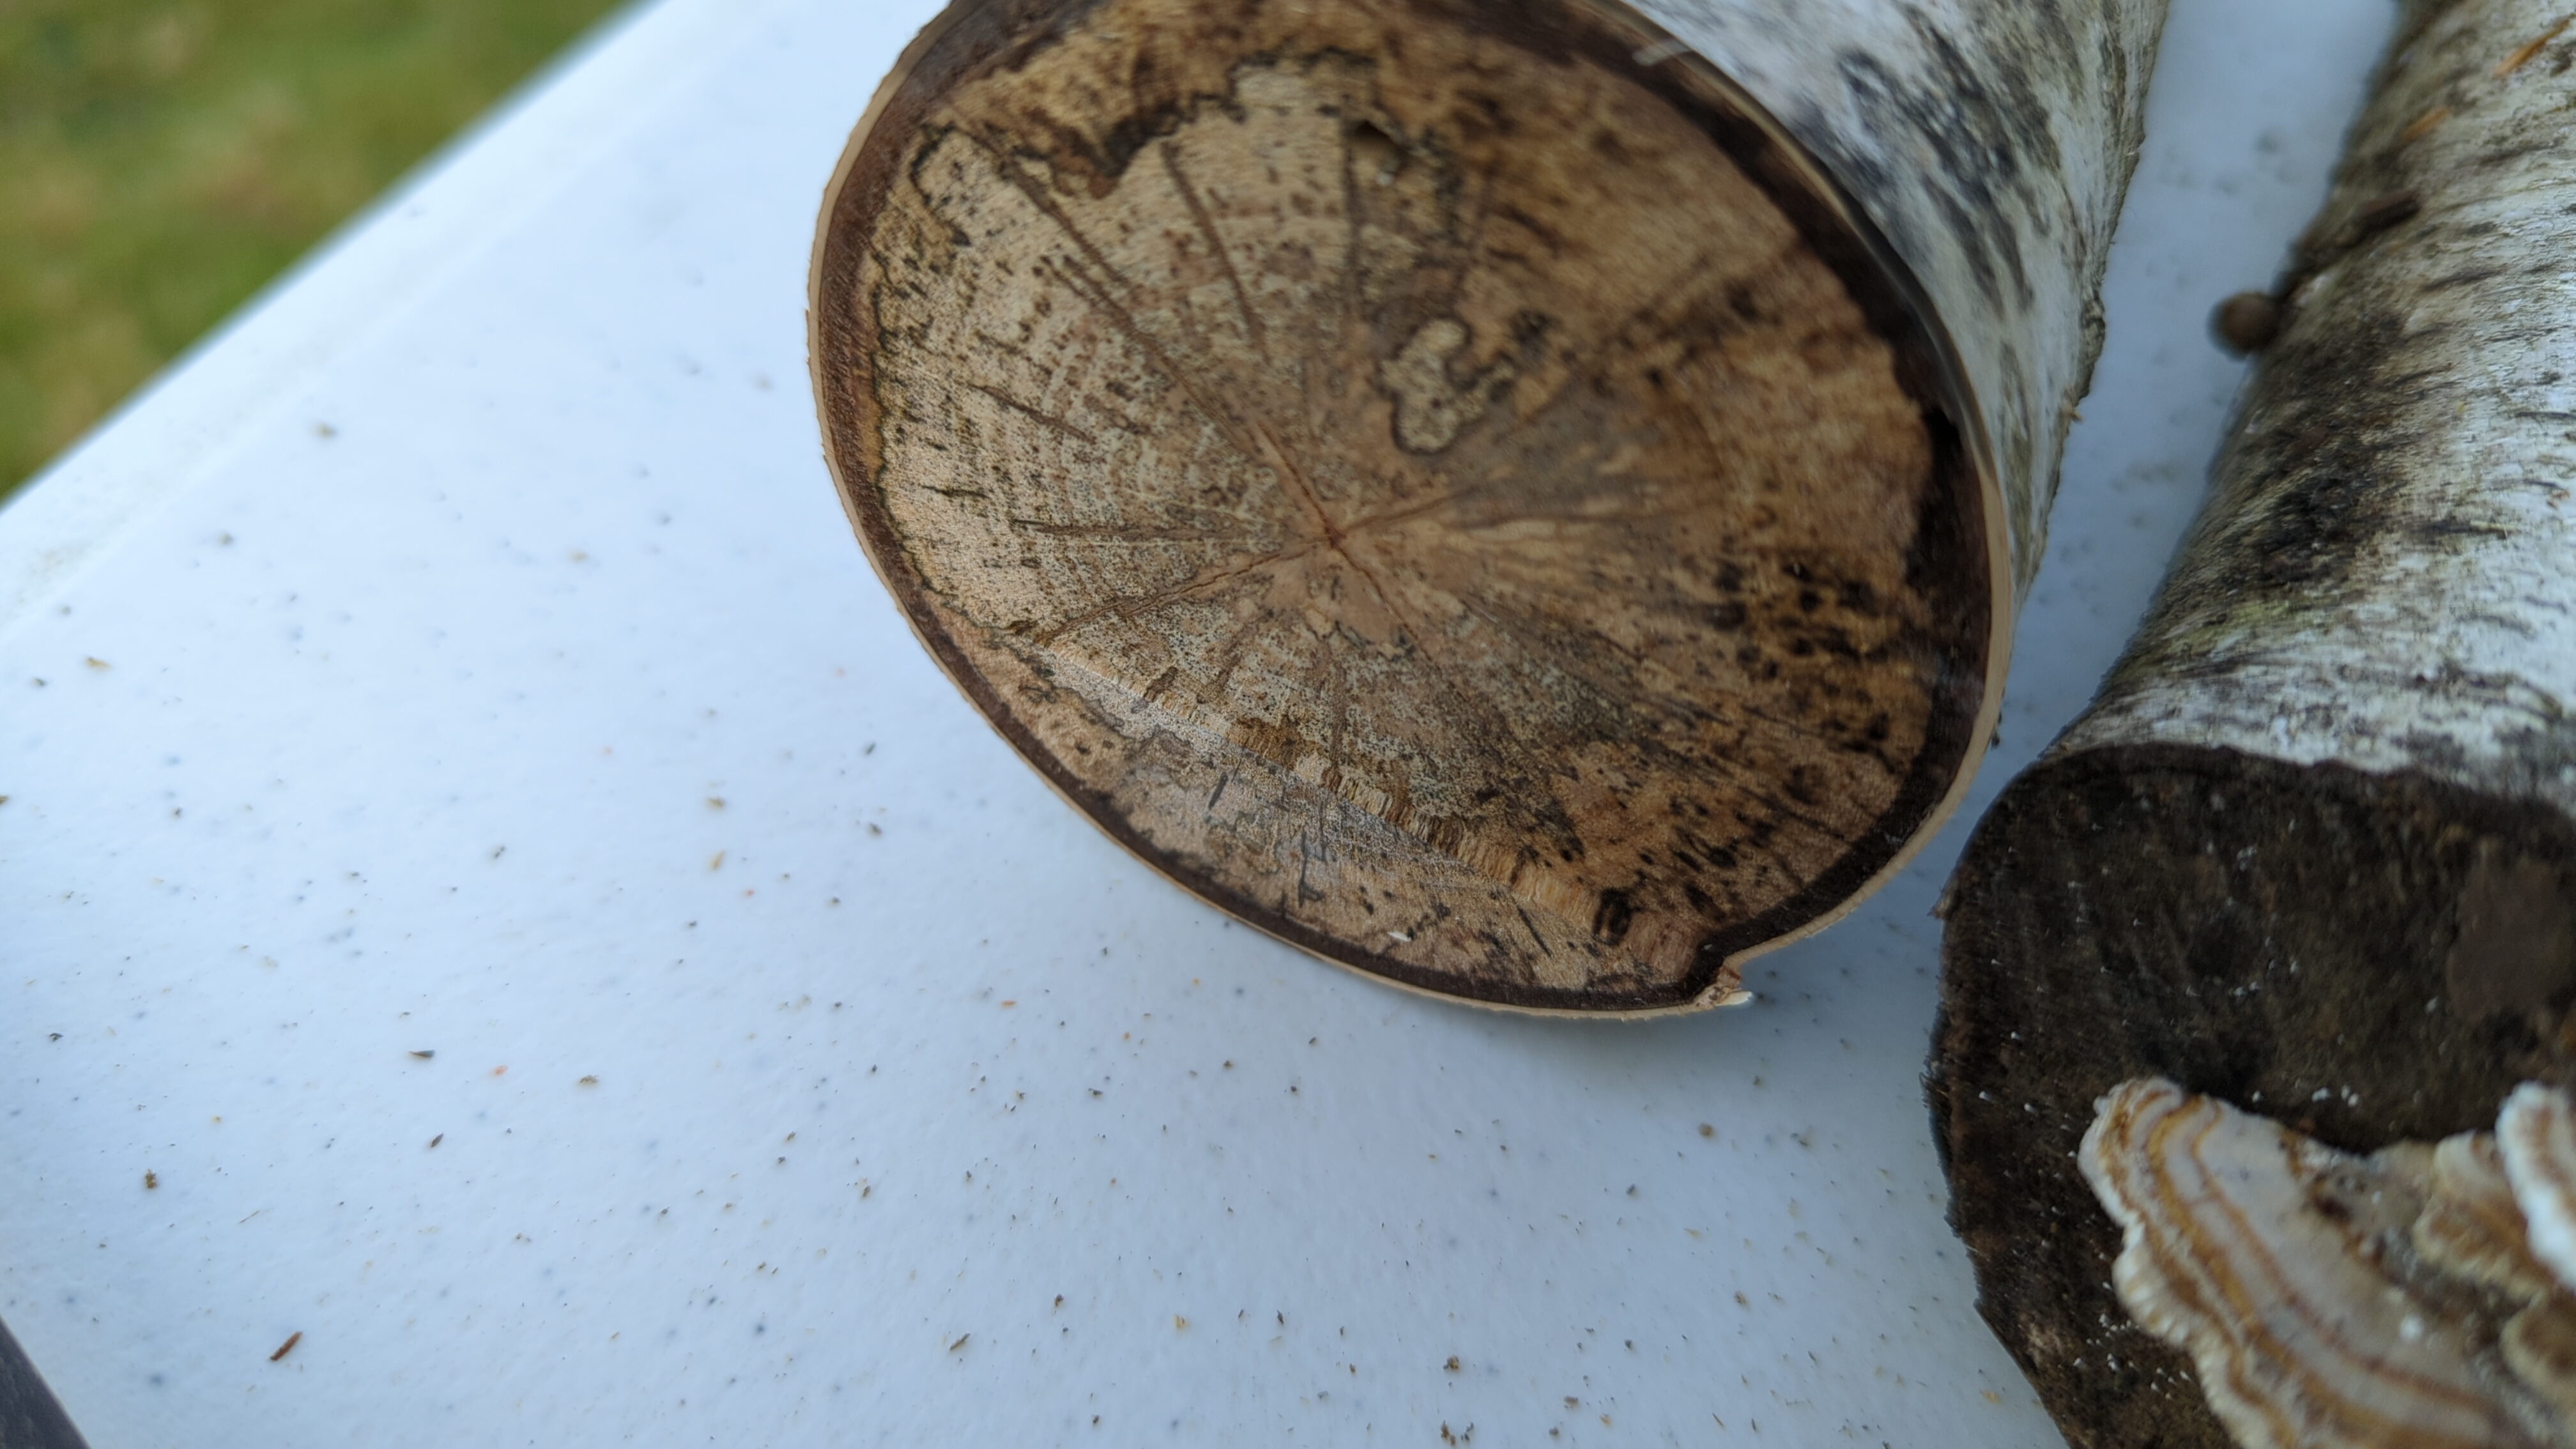 A birch log after an attempted two-pass cut. The face of the log is not flat because I didn’t line up the blade properly on the second pass.